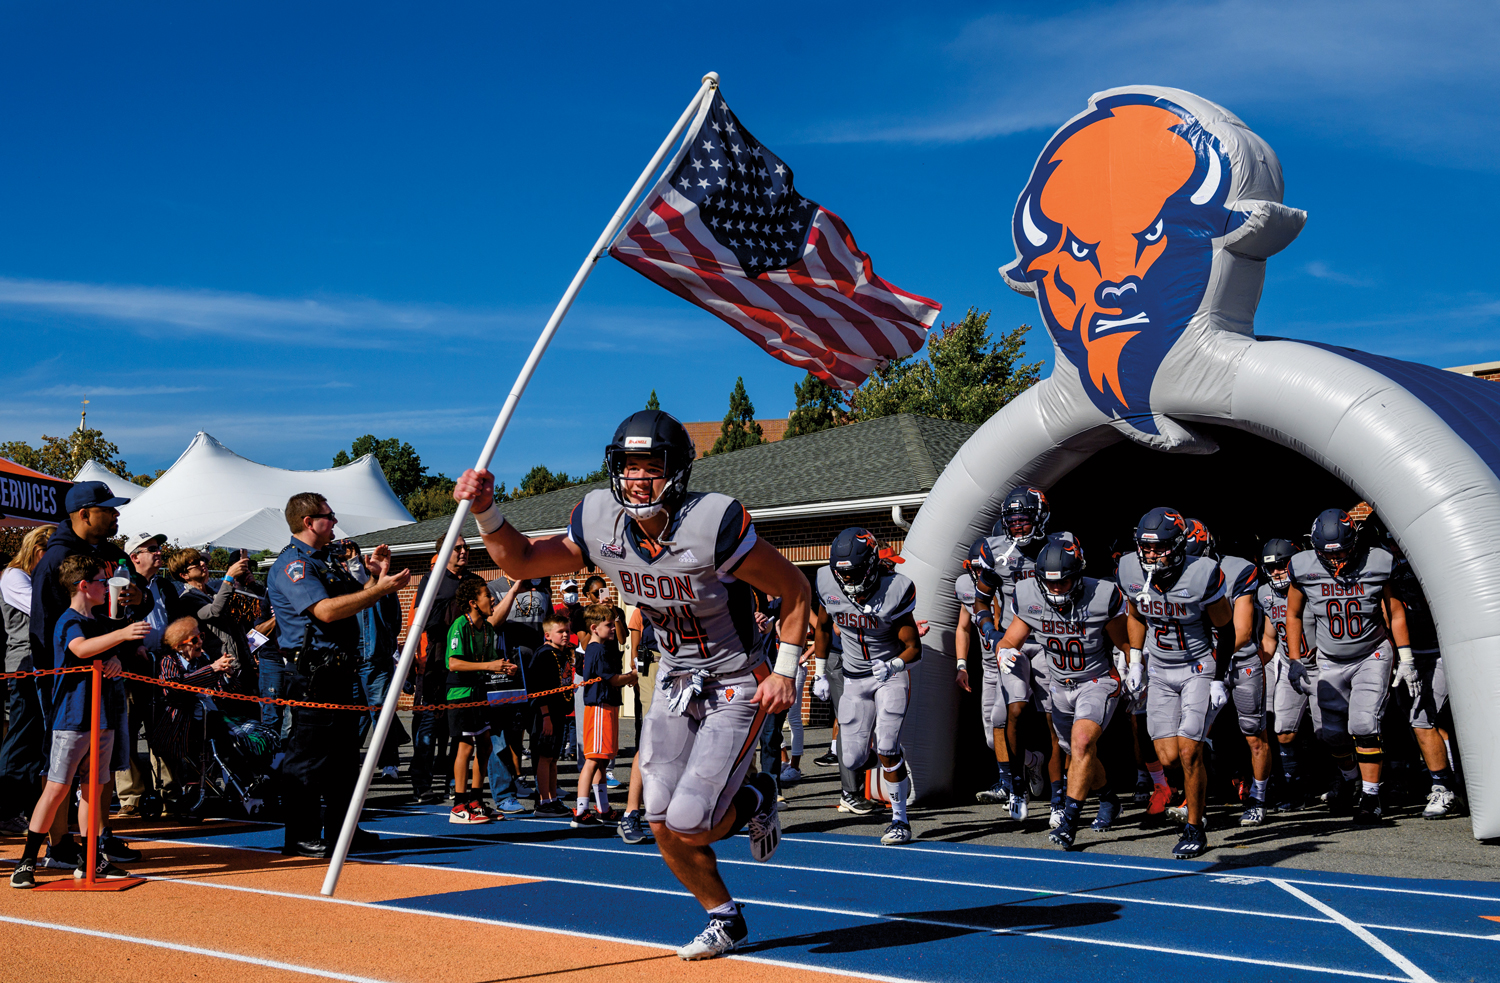 The Bison take the field before defeating Cornell University, 21-10, during Homecoming, Oct. 2, at Christy Mathewson–Memorial Stadium at the Pascucci Family Athletics Complex.